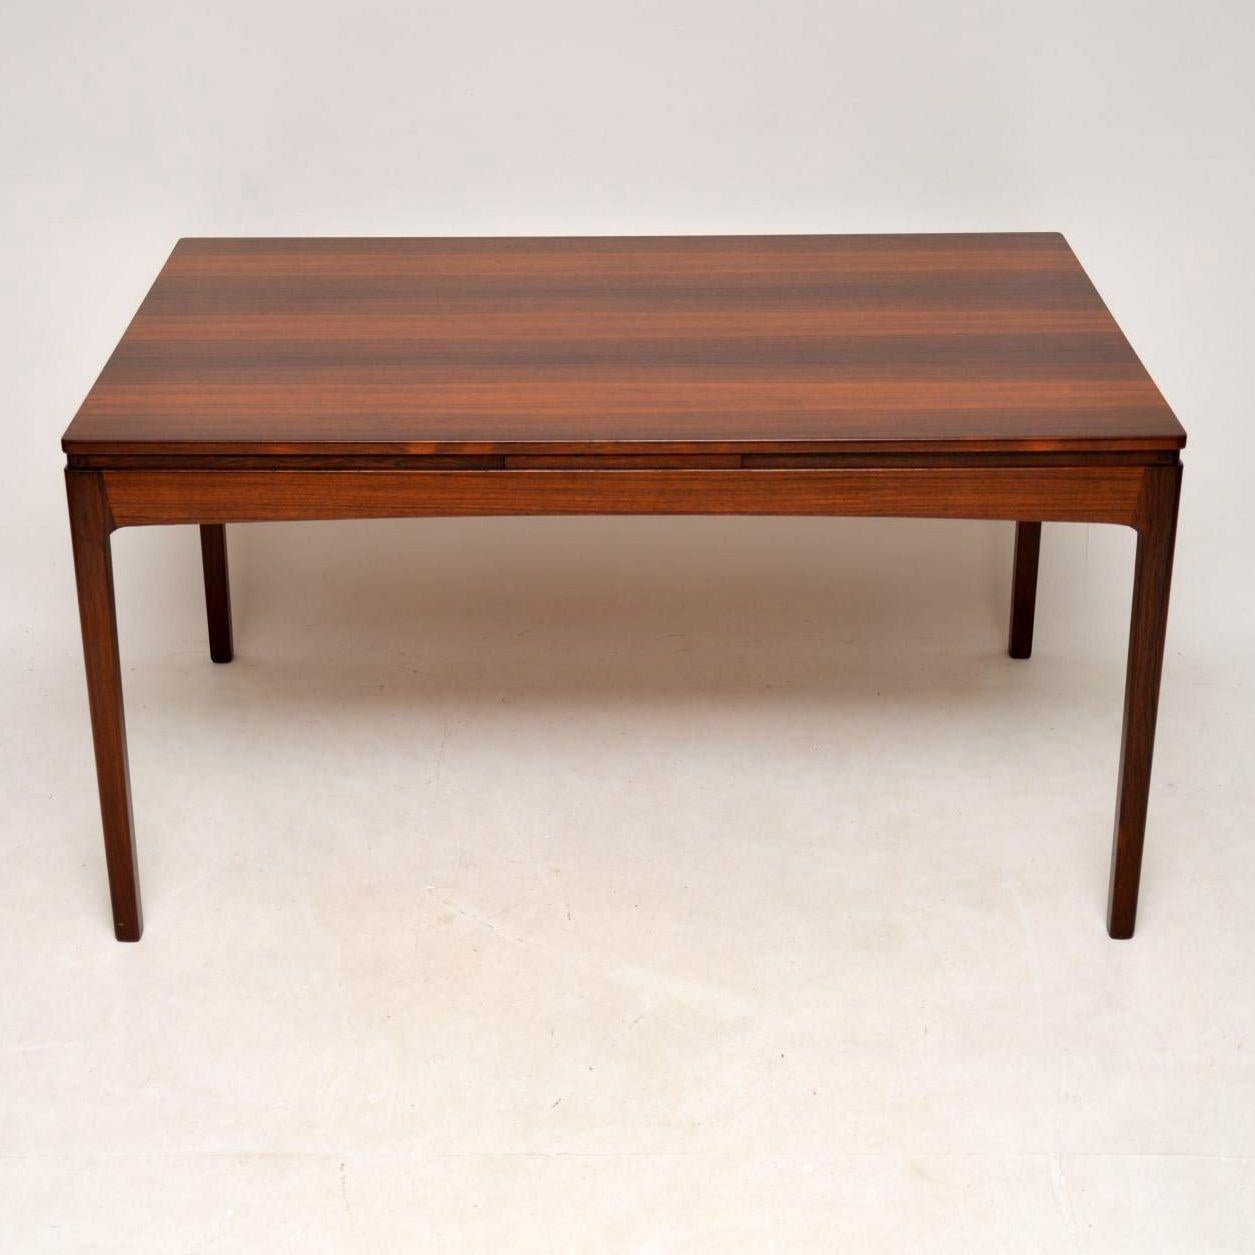 An absolutely magnificent vintage Danish dining table, beautifully made and dates from the 1960s. It was made by Bordum & Nielsen, an extremely high end Danish manufacturer, these were handmade in very limited numbers, so this is incredibly rare.